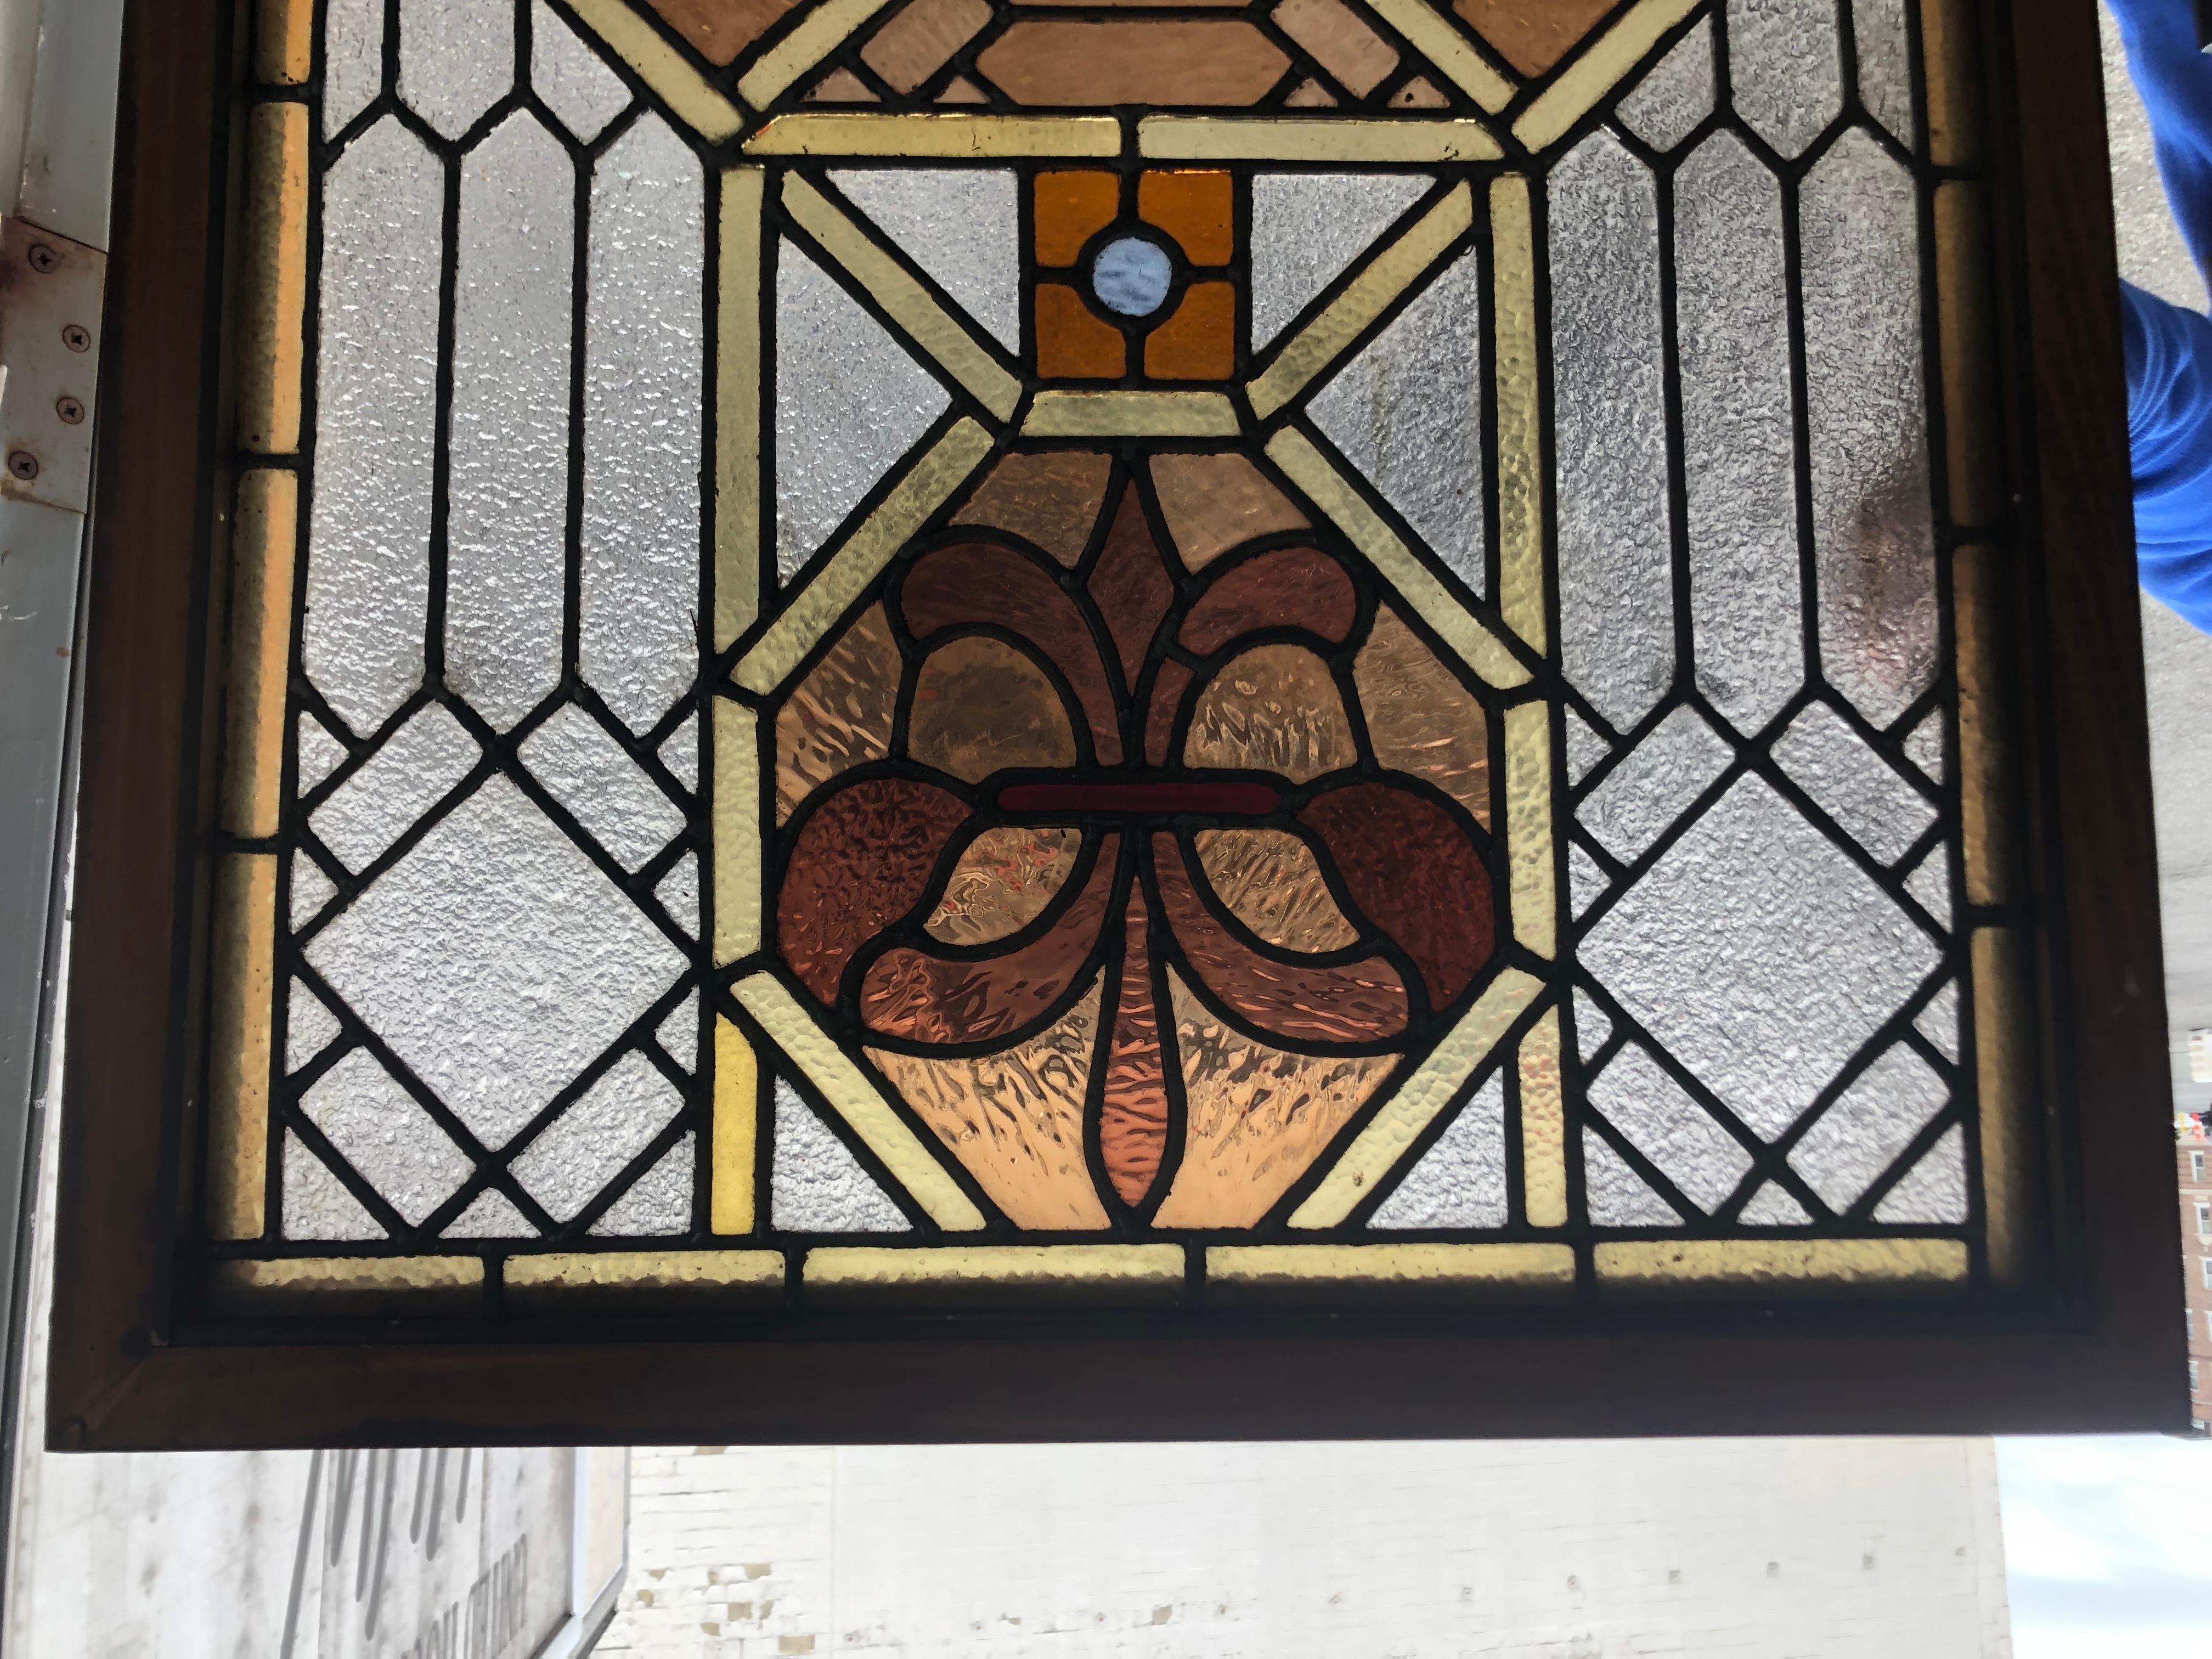 Beautiful Antique Early 20th Century leaded stained glass window with a Jeweled center and Fleur De Lis pattern on the top and bottom. It is in great condition and would look fantastic in front of any window or behind a home bar.